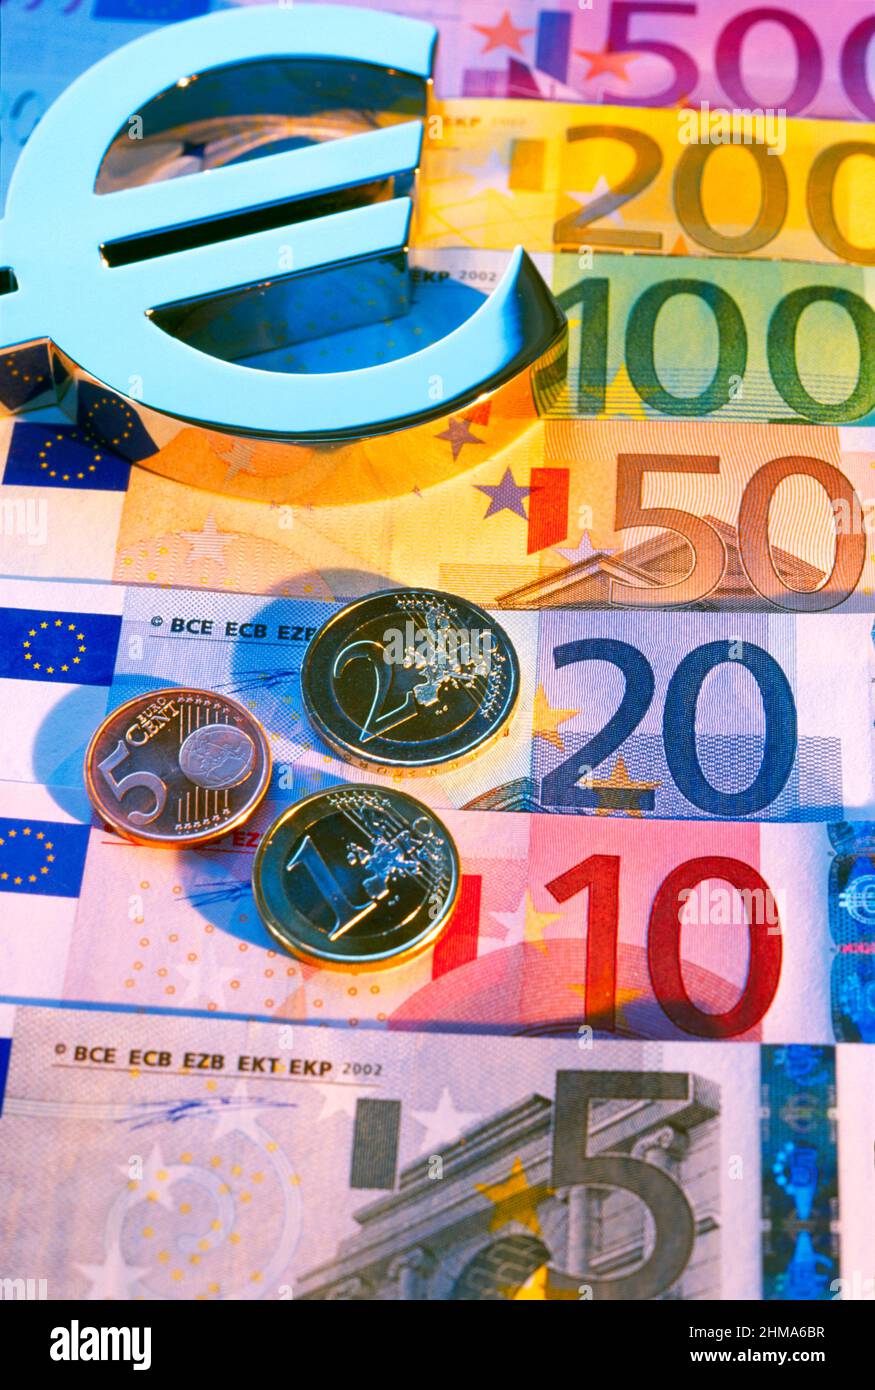 Euro currency, with Euro symbol, Stock Photo